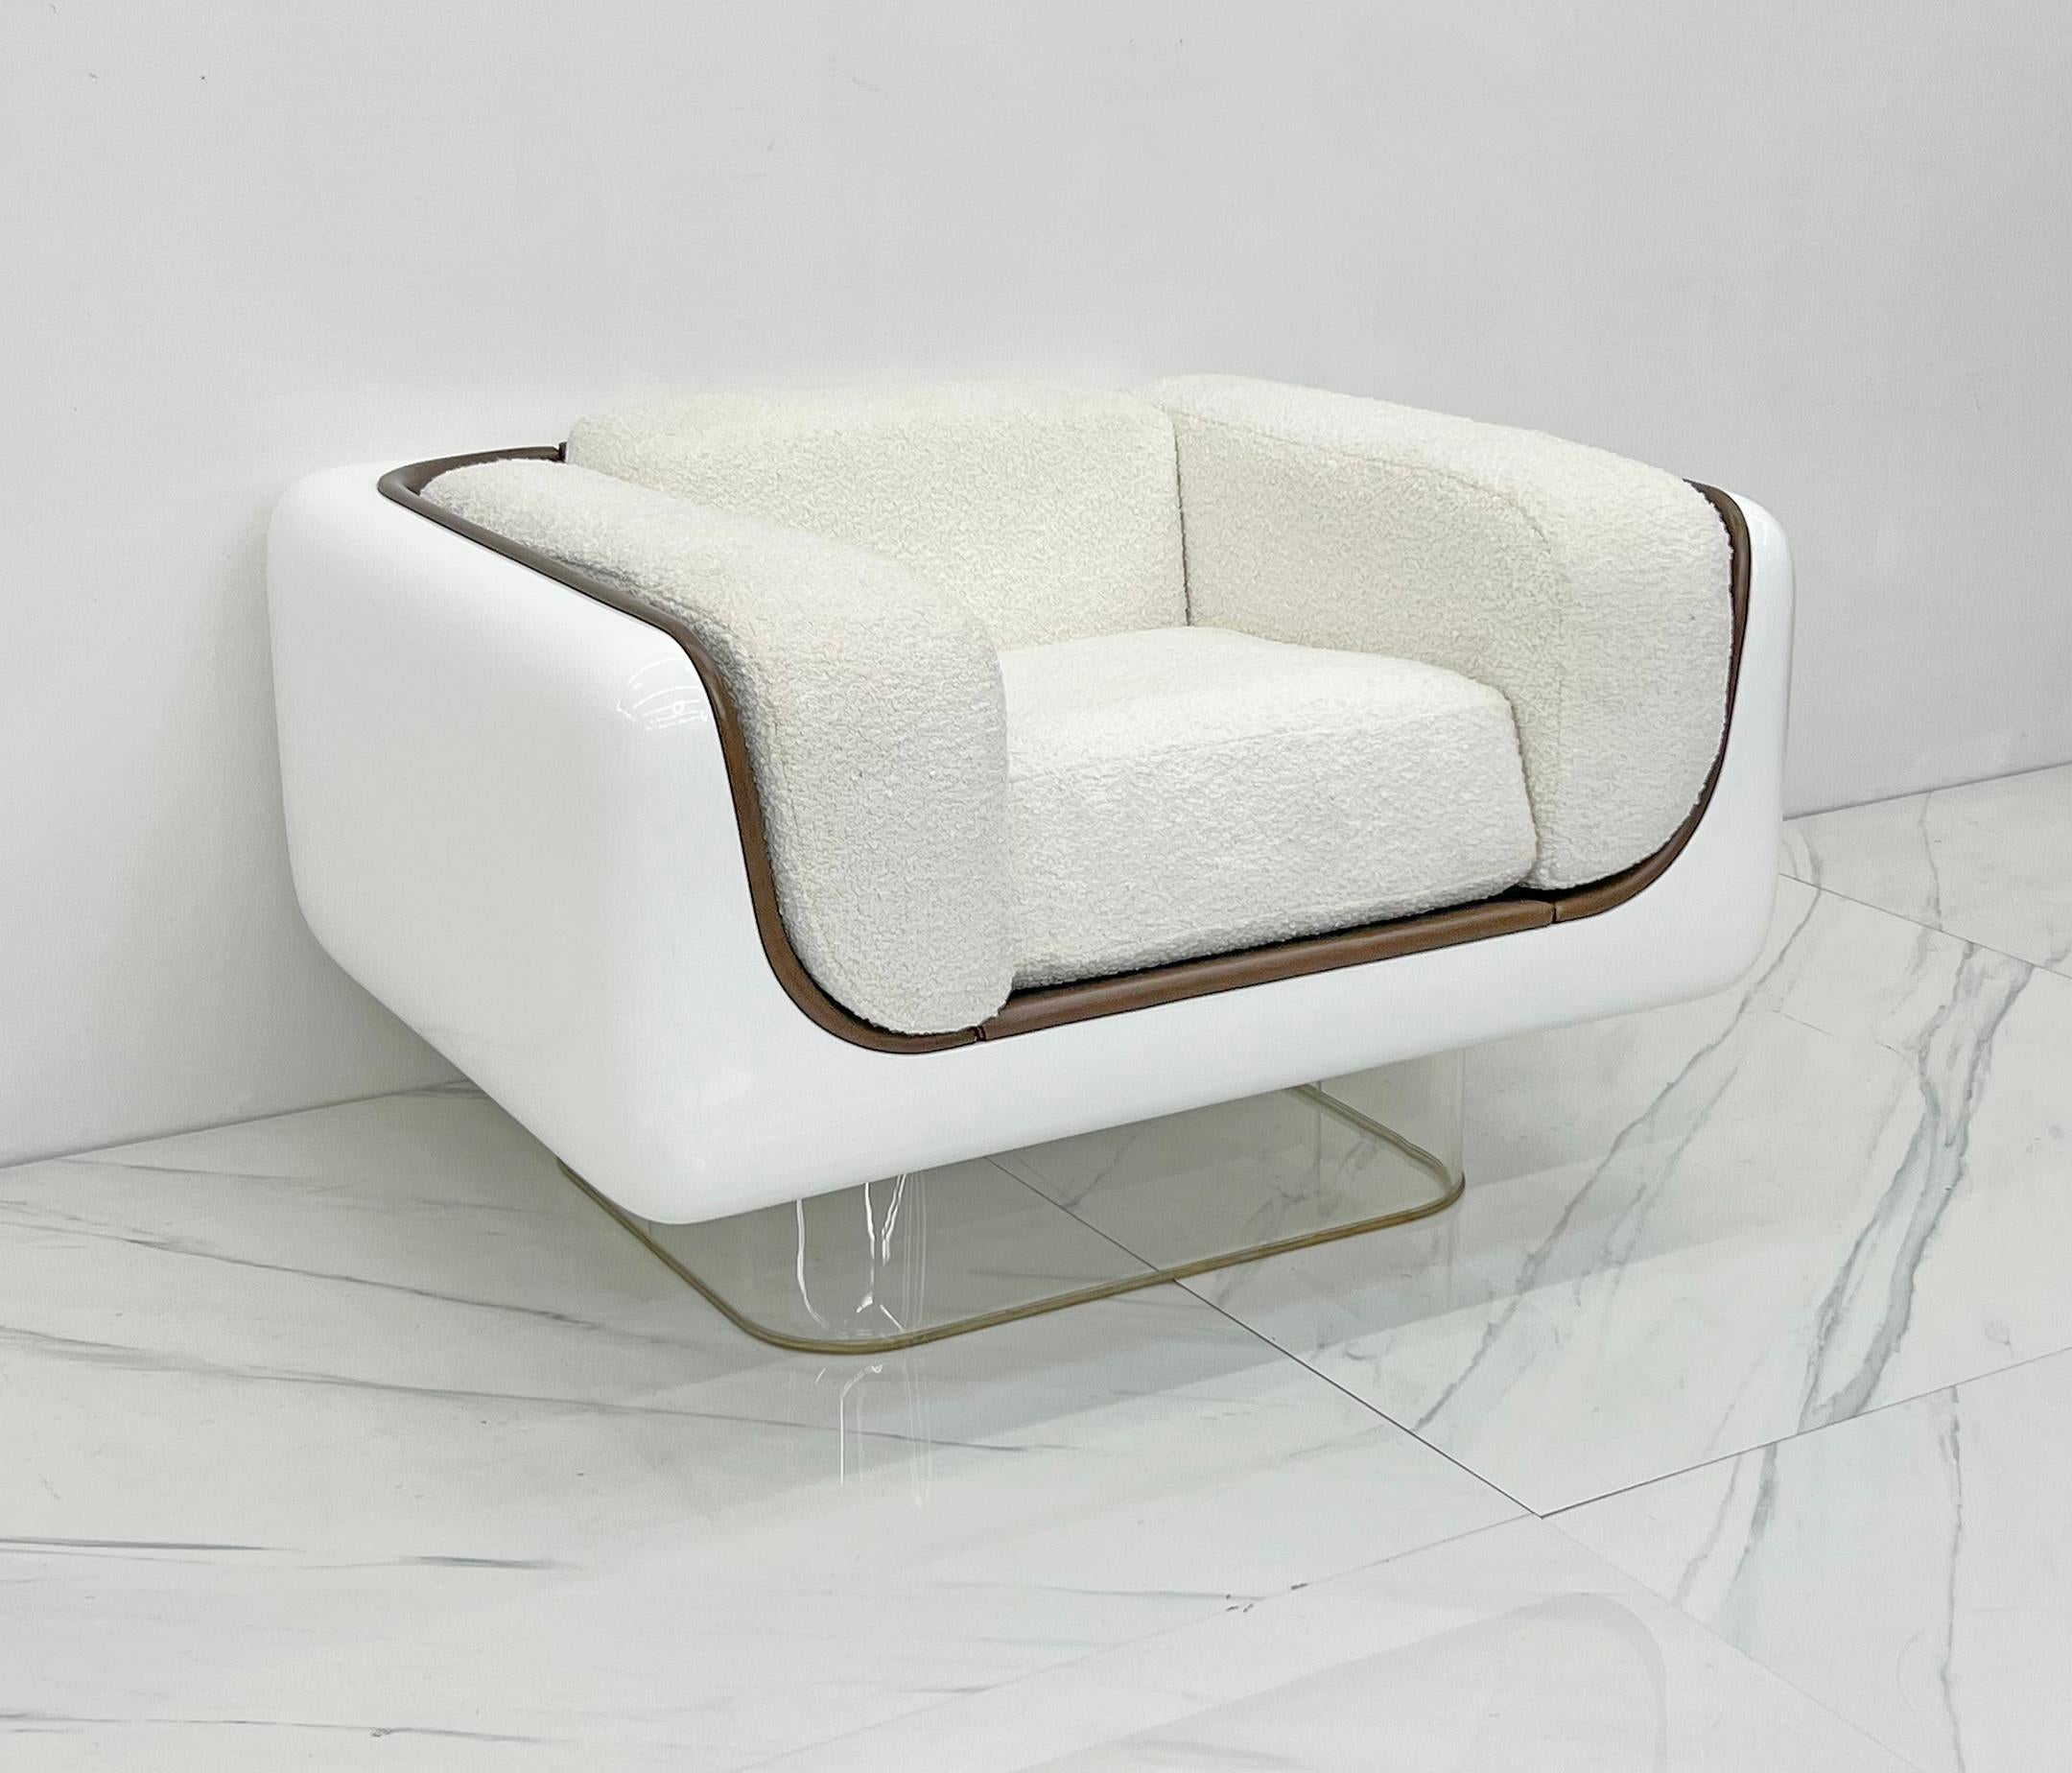 Designed in the 1970s, this chair is considered to be one of the holy grails for Space Age and modern design enthusiasts alike. This lounge chair is stunning .With its curved body, rounded edges, and clean lines, this set-- while Space Age, mod in